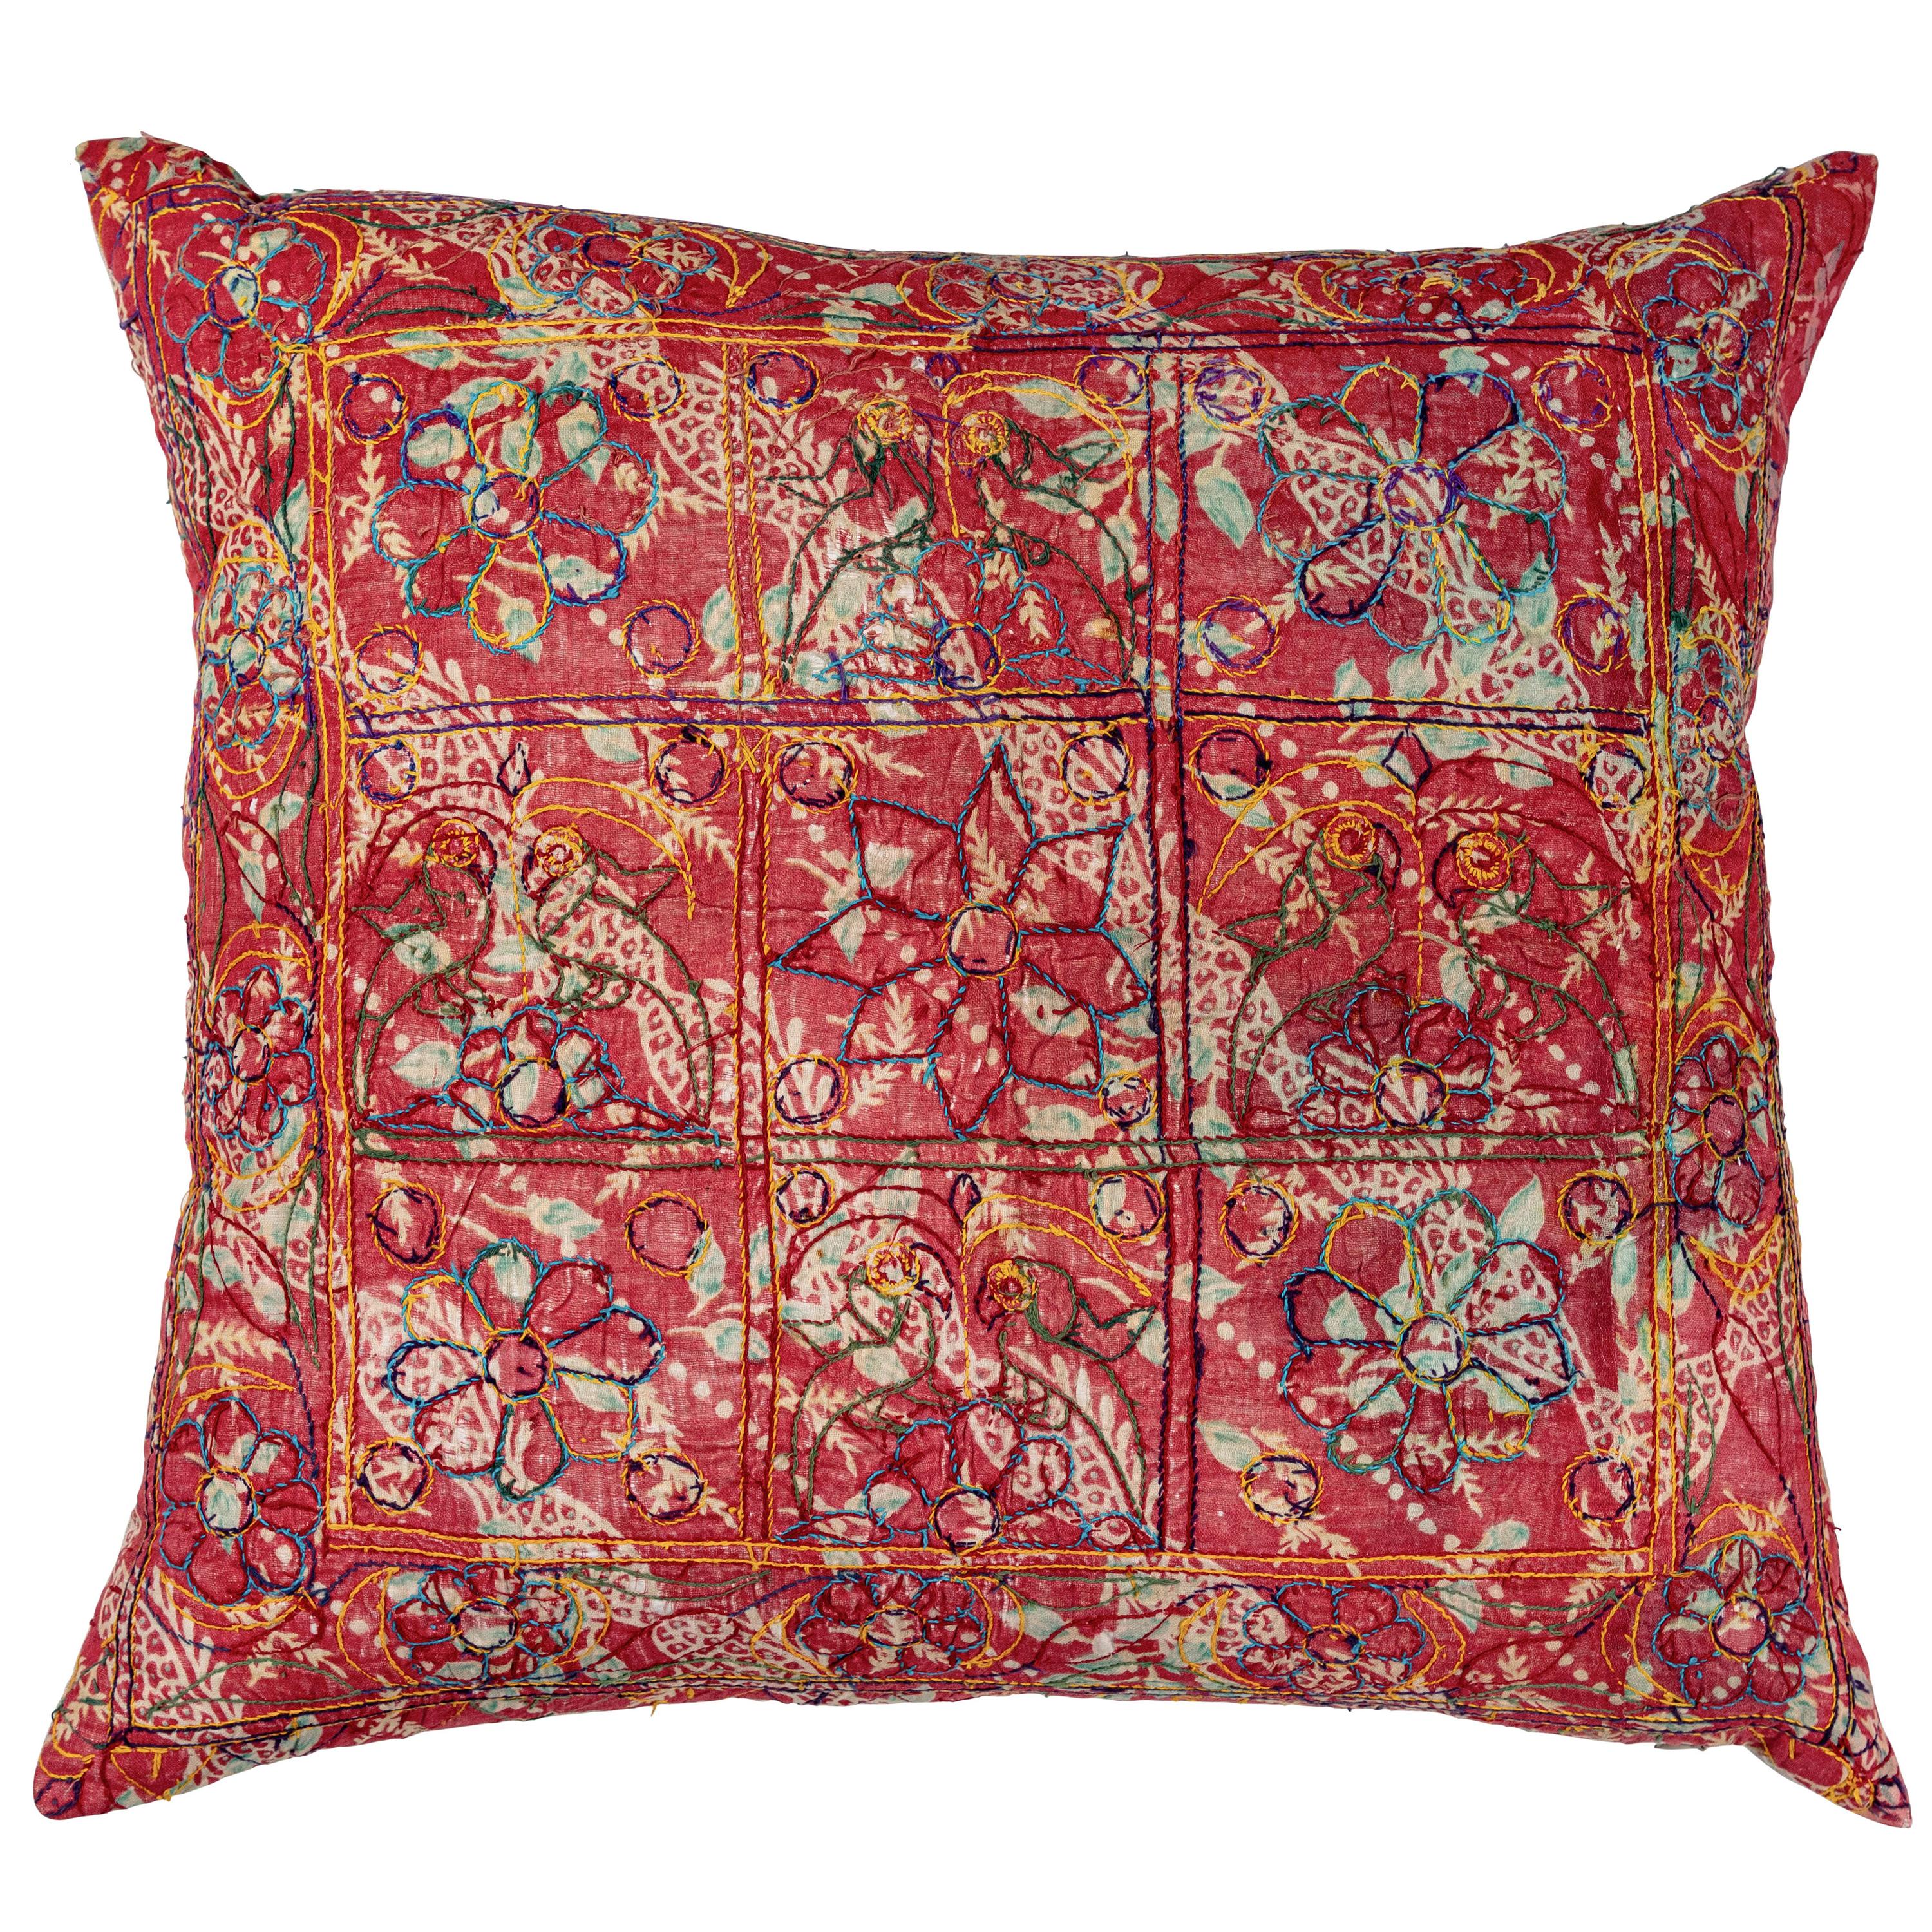 Embroidered Block Print Pillow For Sale